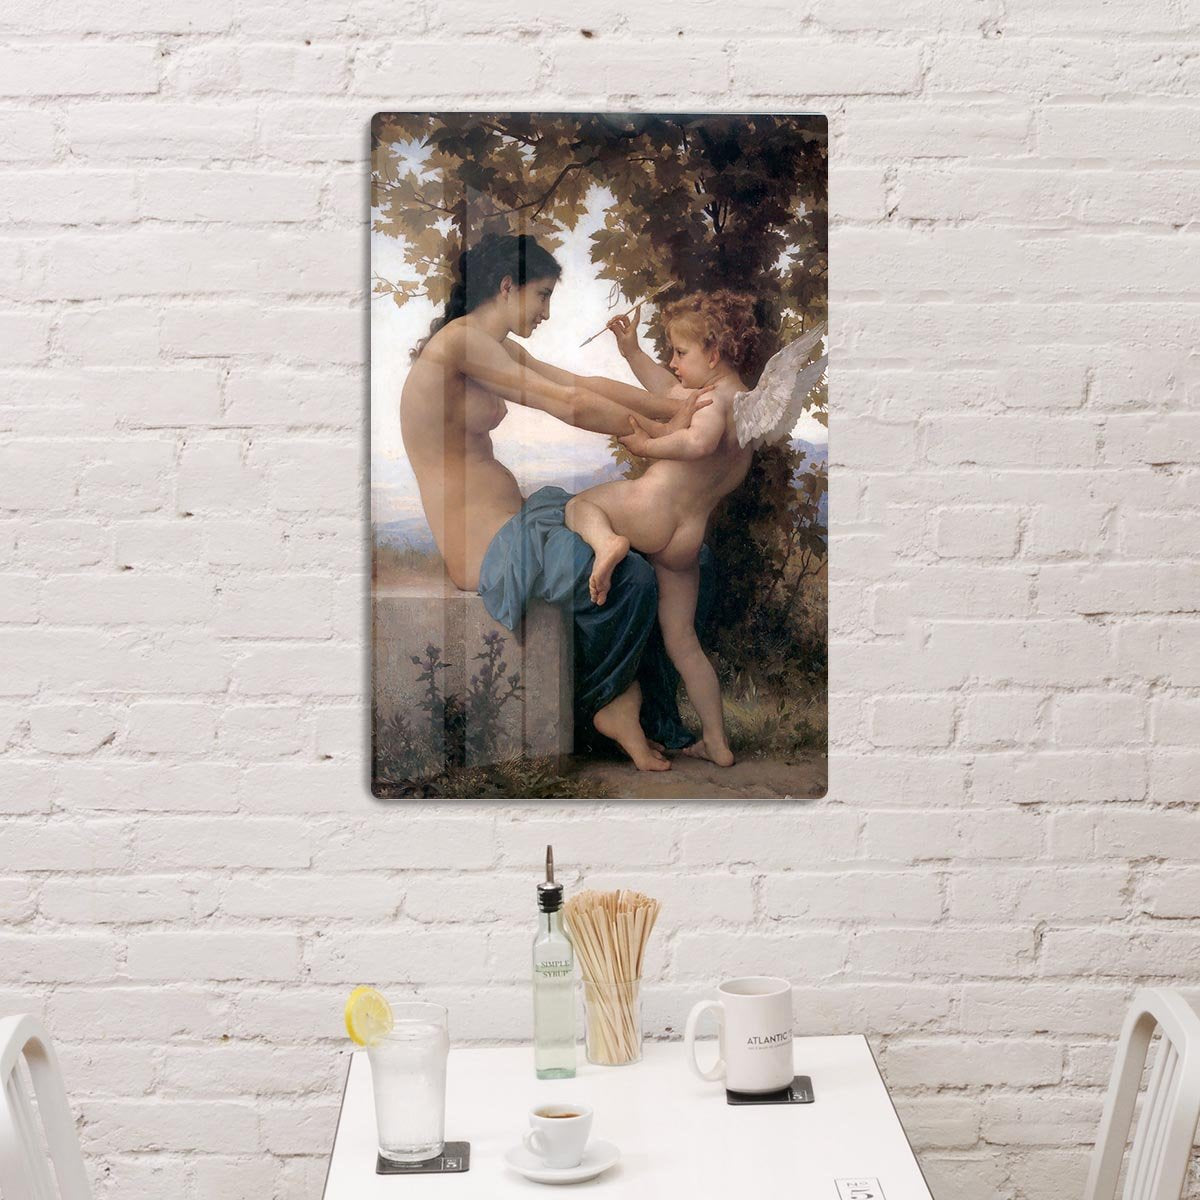 A Young Girl Defending Herself Against Eros By Bouguereau HD Metal Print